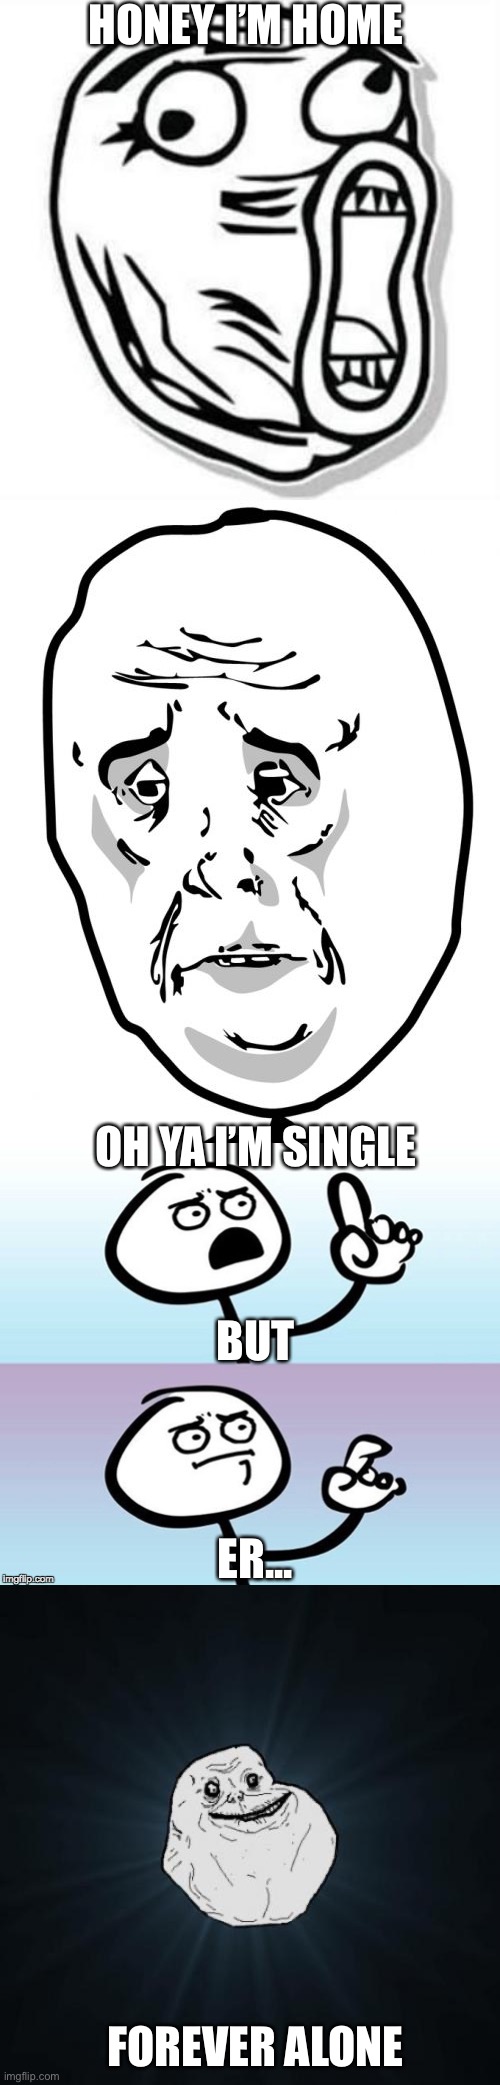 Rage comics | HONEY I’M HOME; OH YA I’M SINGLE; BUT; ER... FOREVER ALONE | image tagged in memes,forever alone,okay guy rage face 2,wait a minute never mind,derp face | made w/ Imgflip meme maker